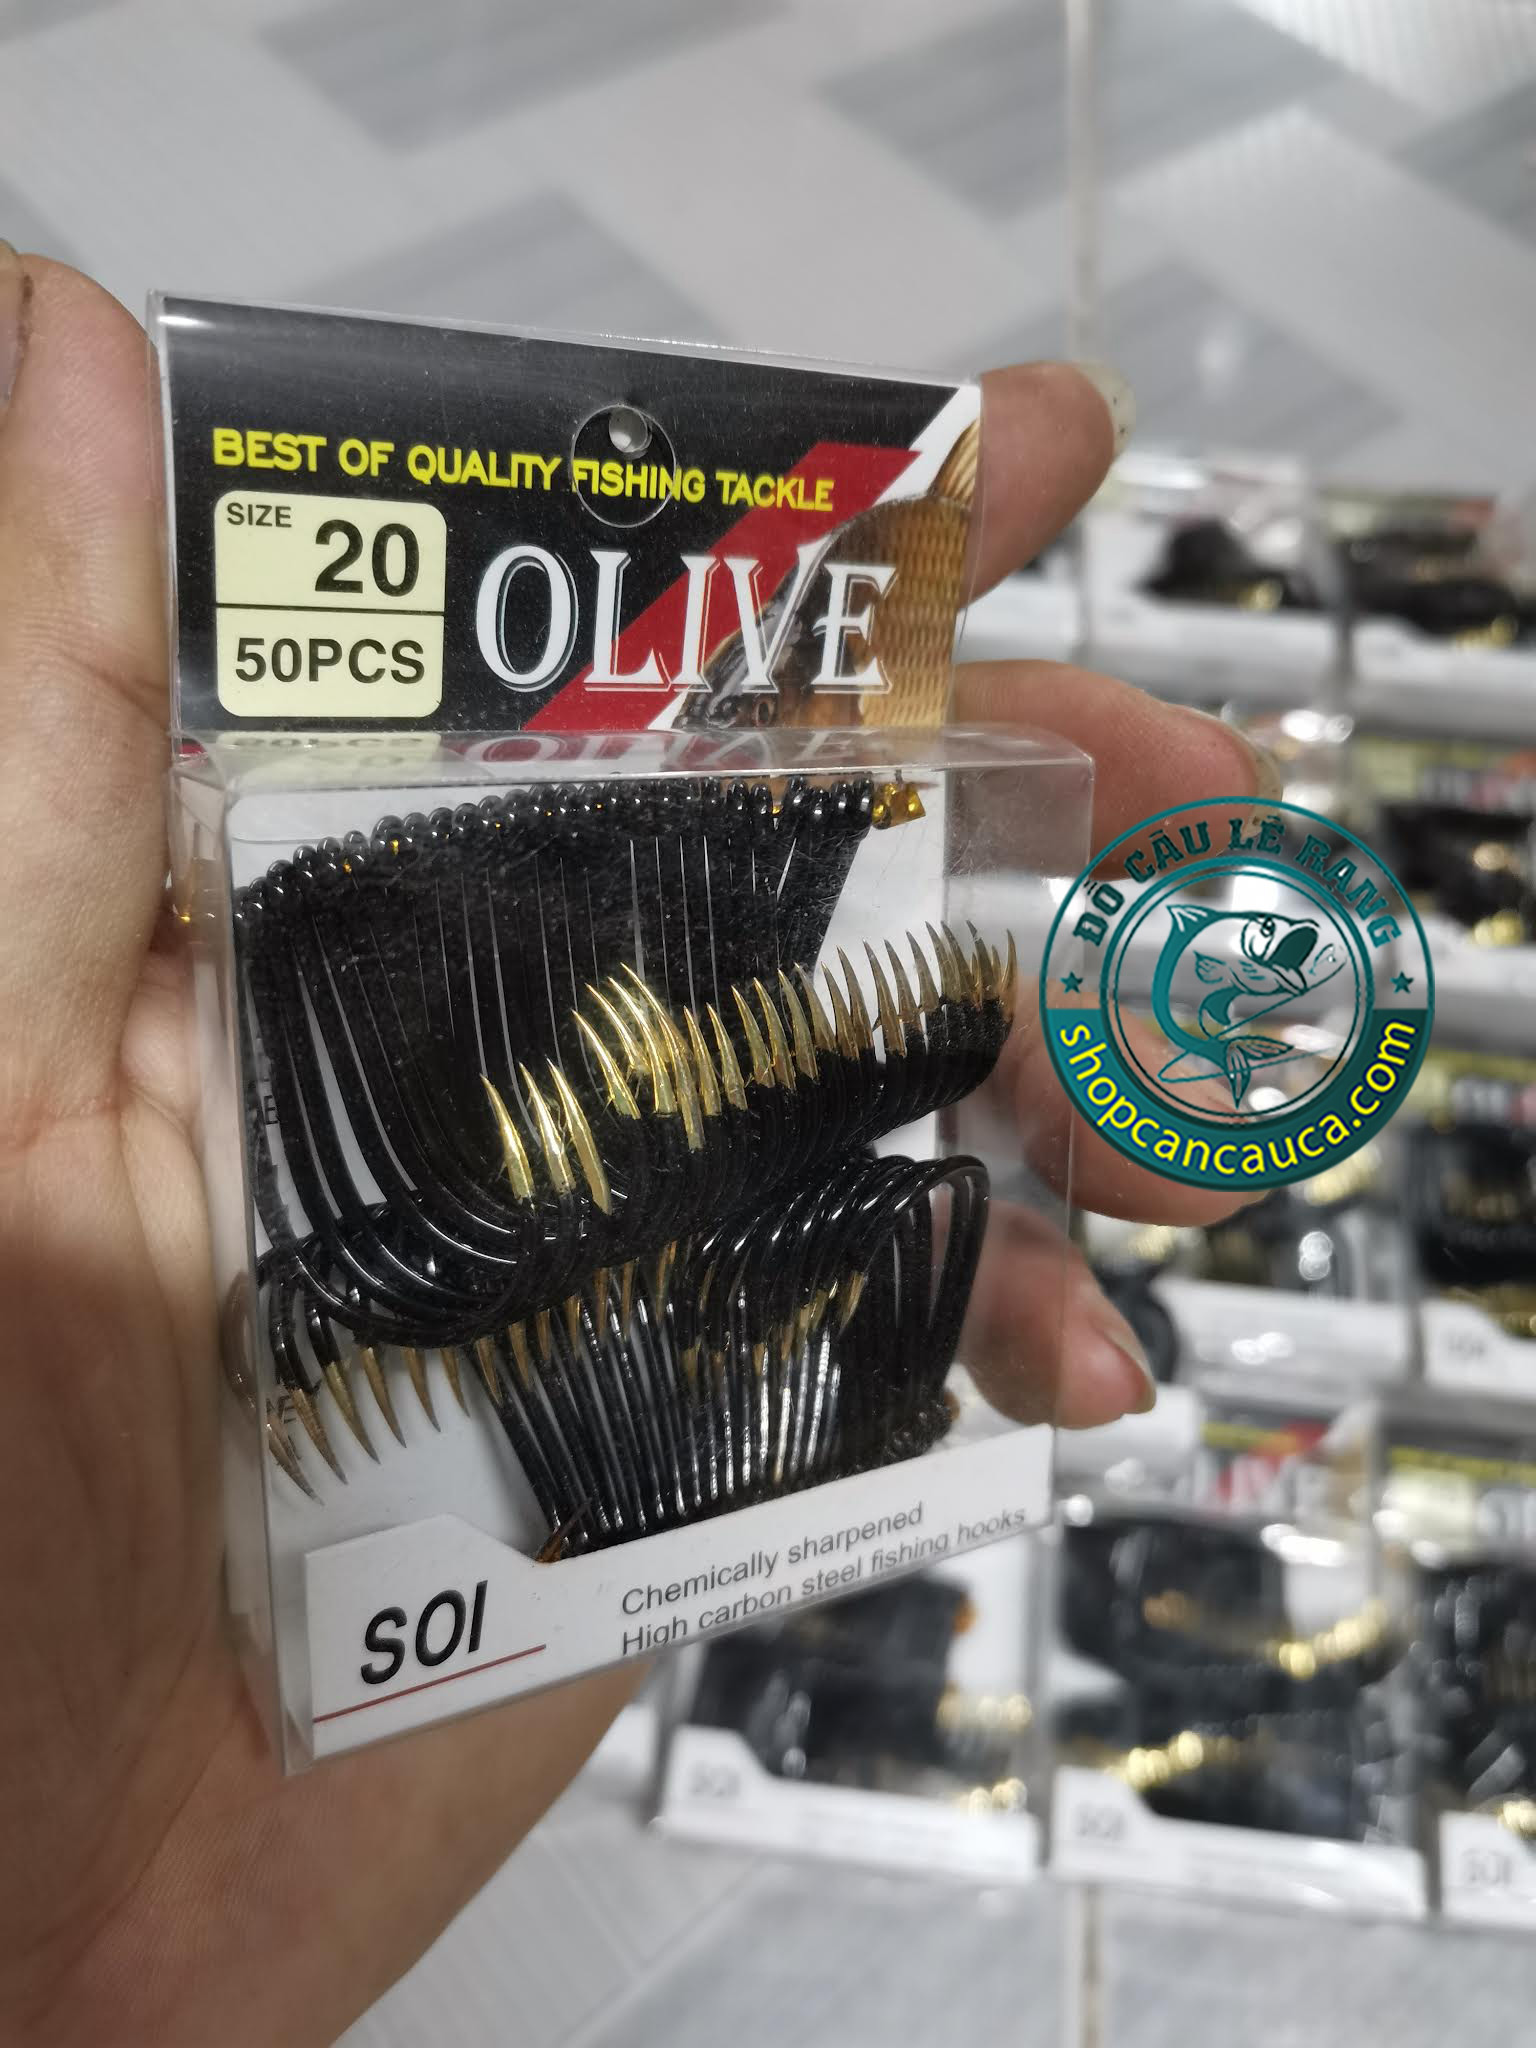 luoi sol olive